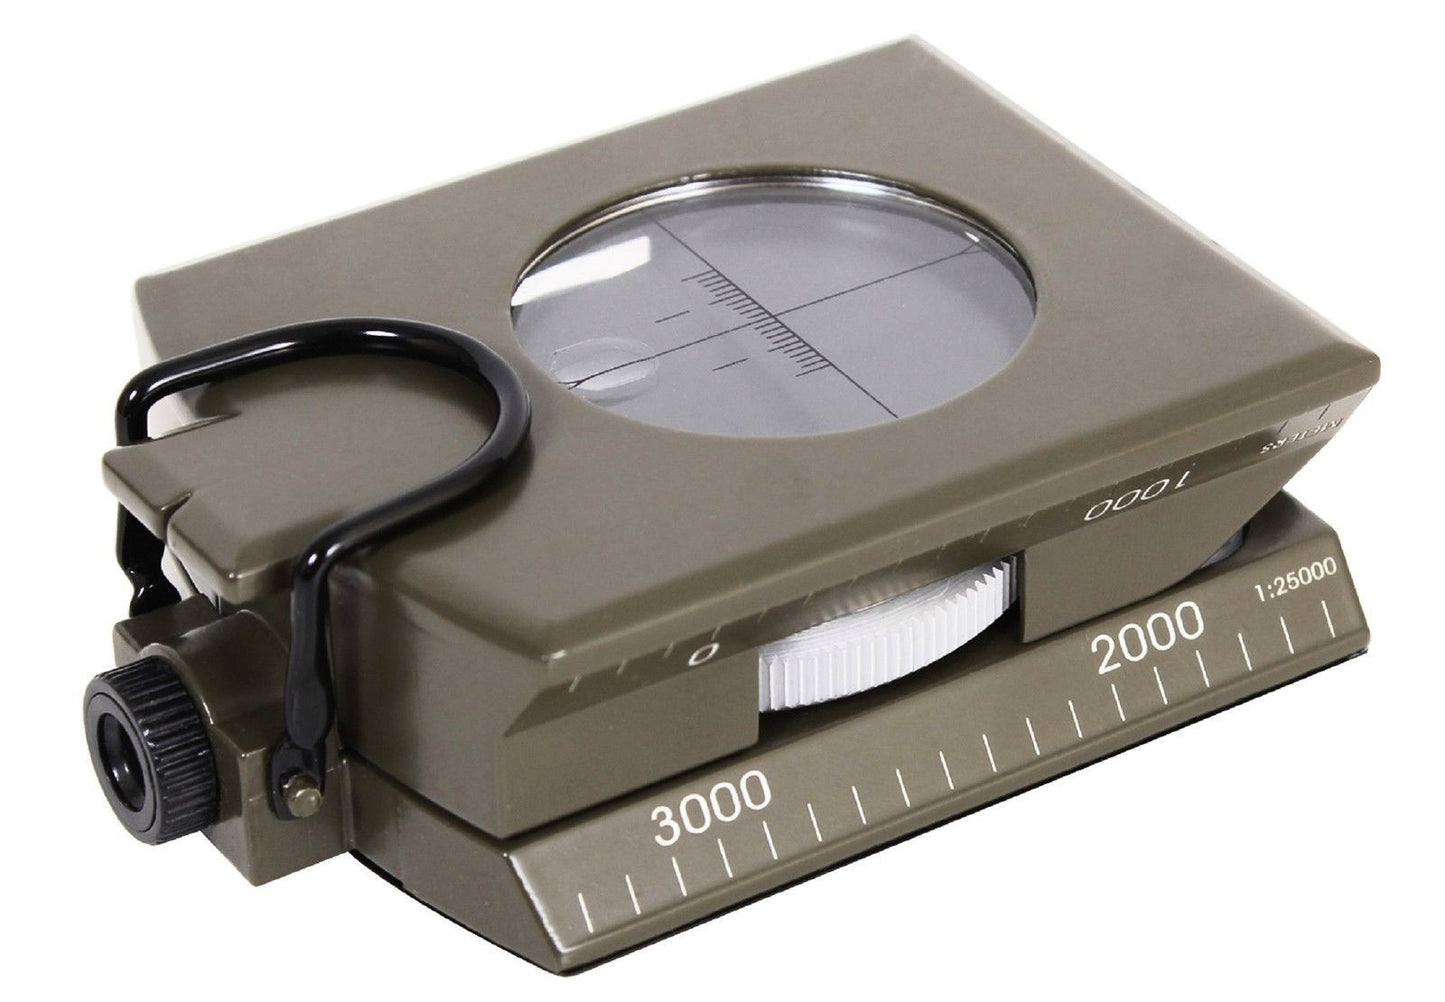 Deluxe Olive Drab Folding Marching Compass w/ Scales, Level, Magnifier